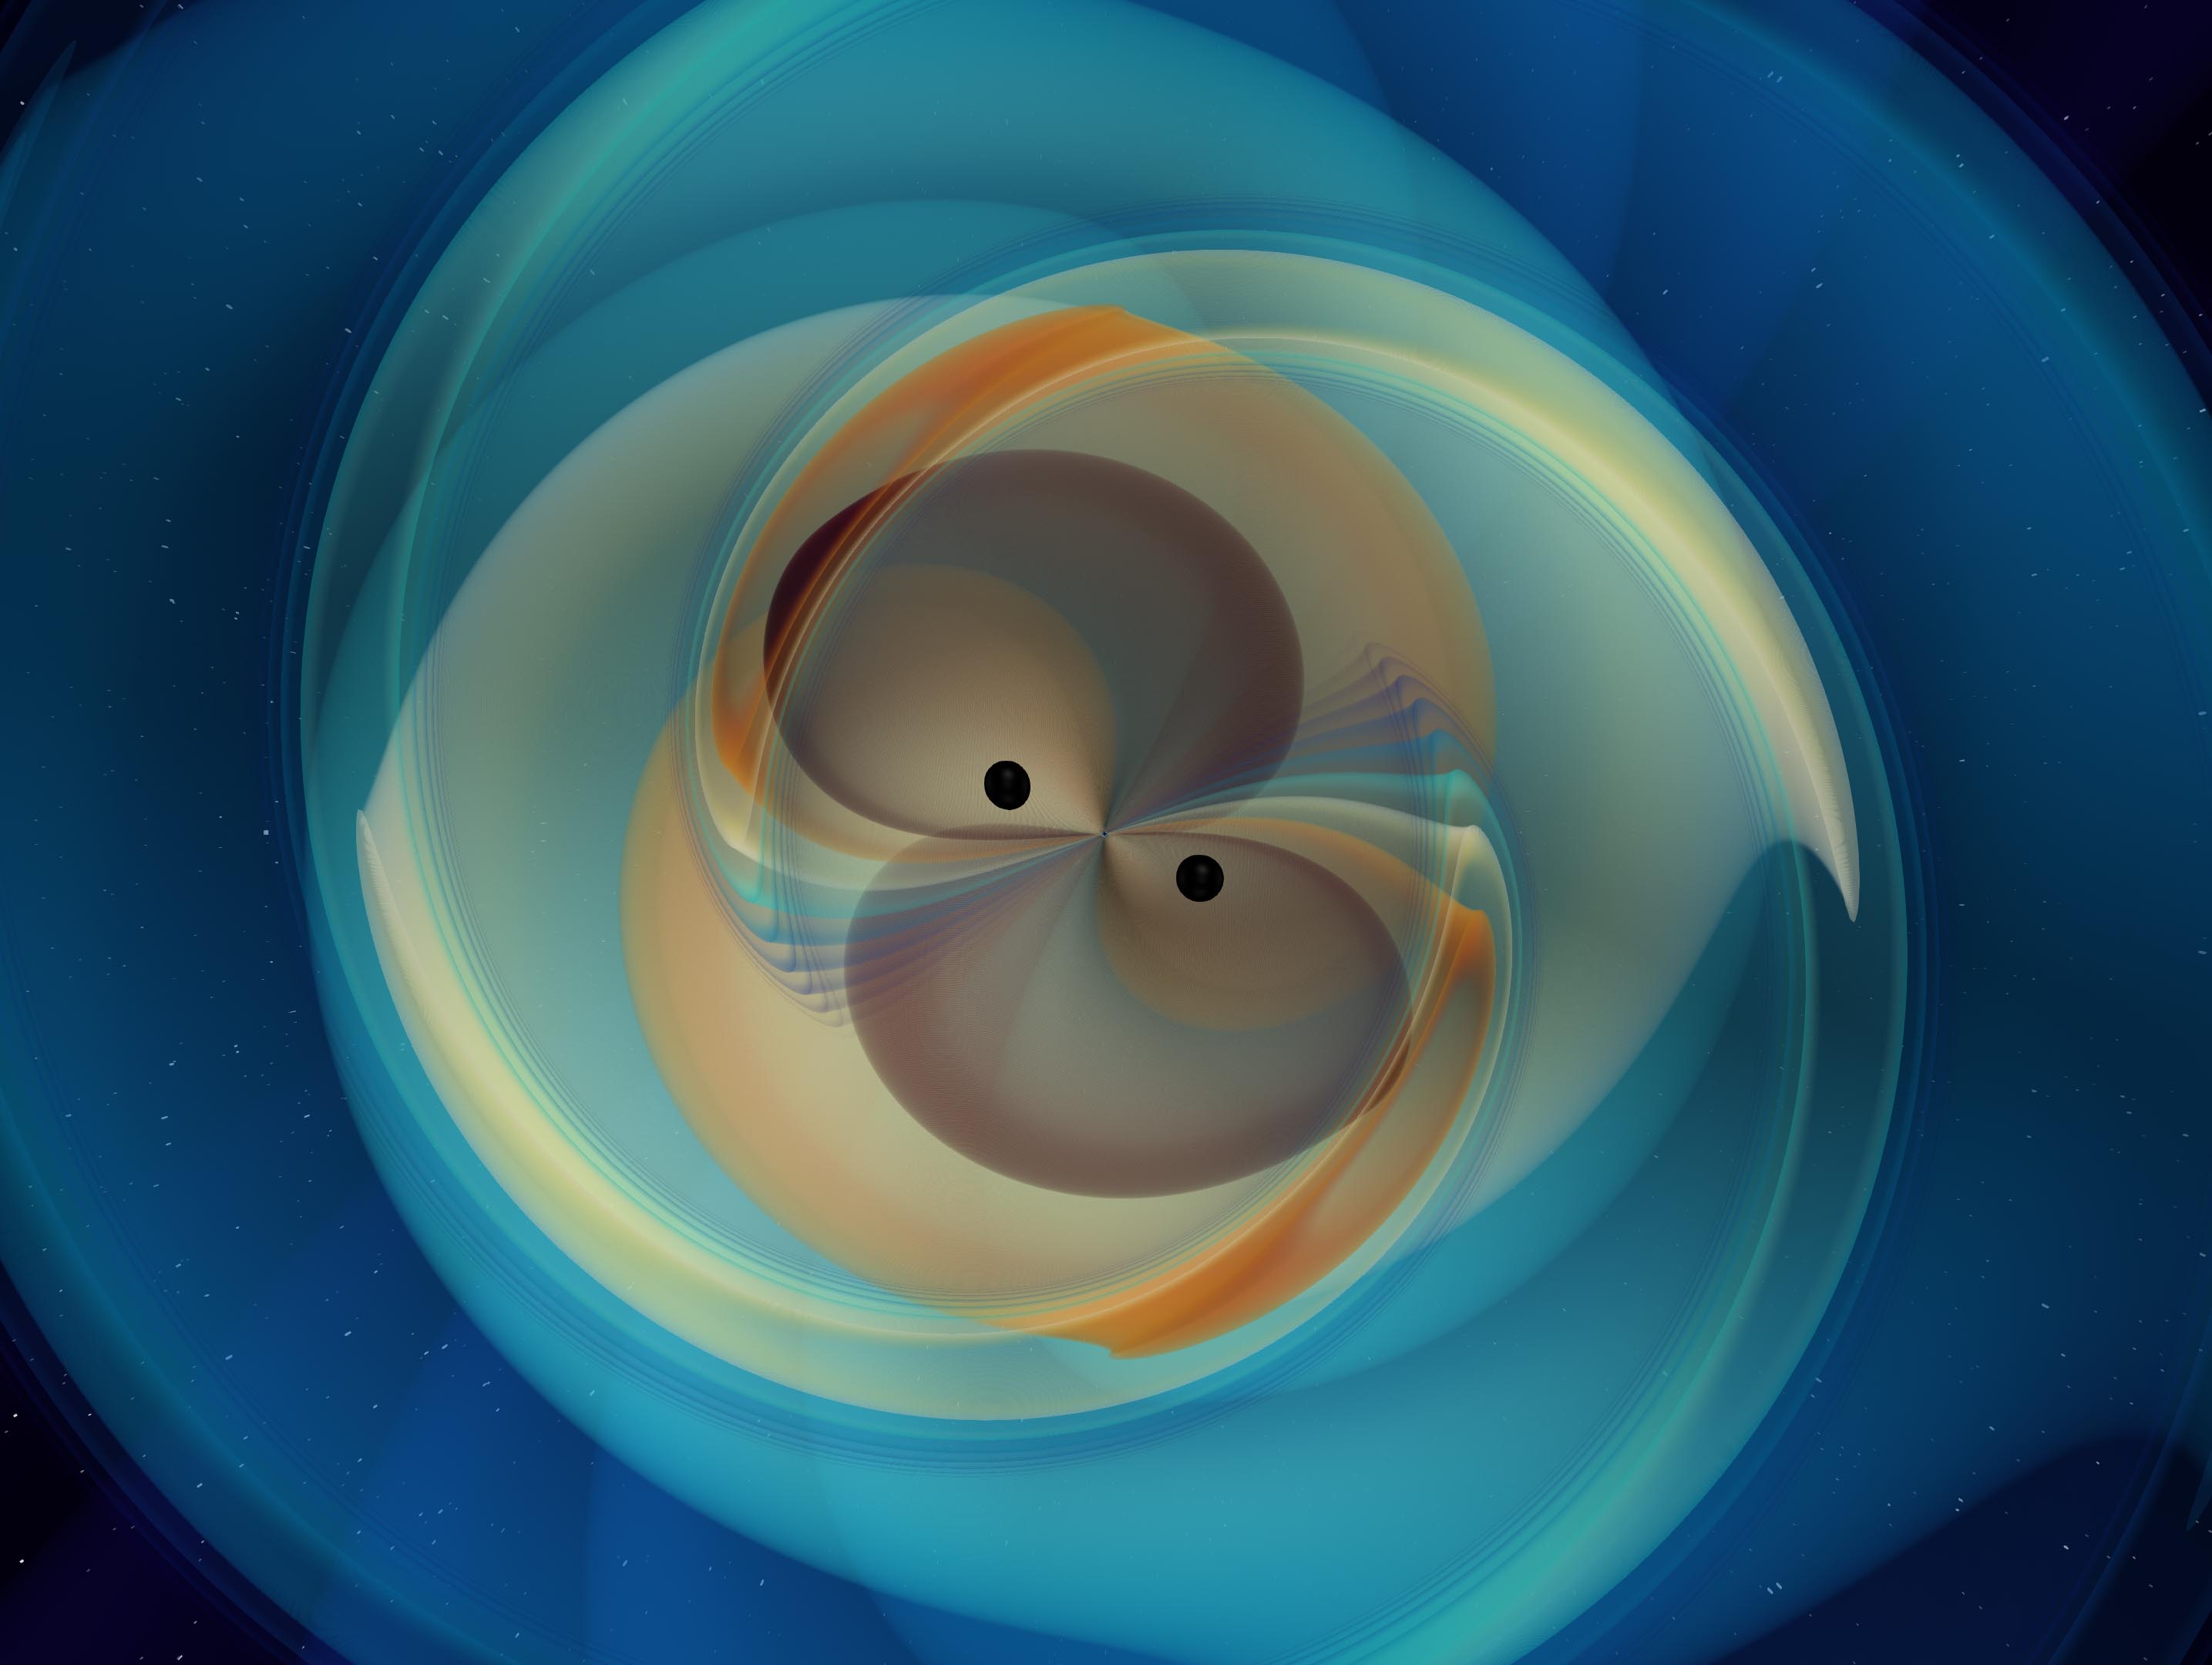 Numerical simulation of two black holes that spiral inwards and merge, emitting gravitational waves. The simulated gravitational wave signal is consistent with the observation made by the LIGO and Virgo gravitational wave detectors on May 21st, 2019 (GW190521). Image Copyright © N. Fischer, H. Pfeiffer, A. Buonanno (Max Planck Institute for Gravitational Physics), Simulating eXtreme Spacetimes (SXS) Collaboration.